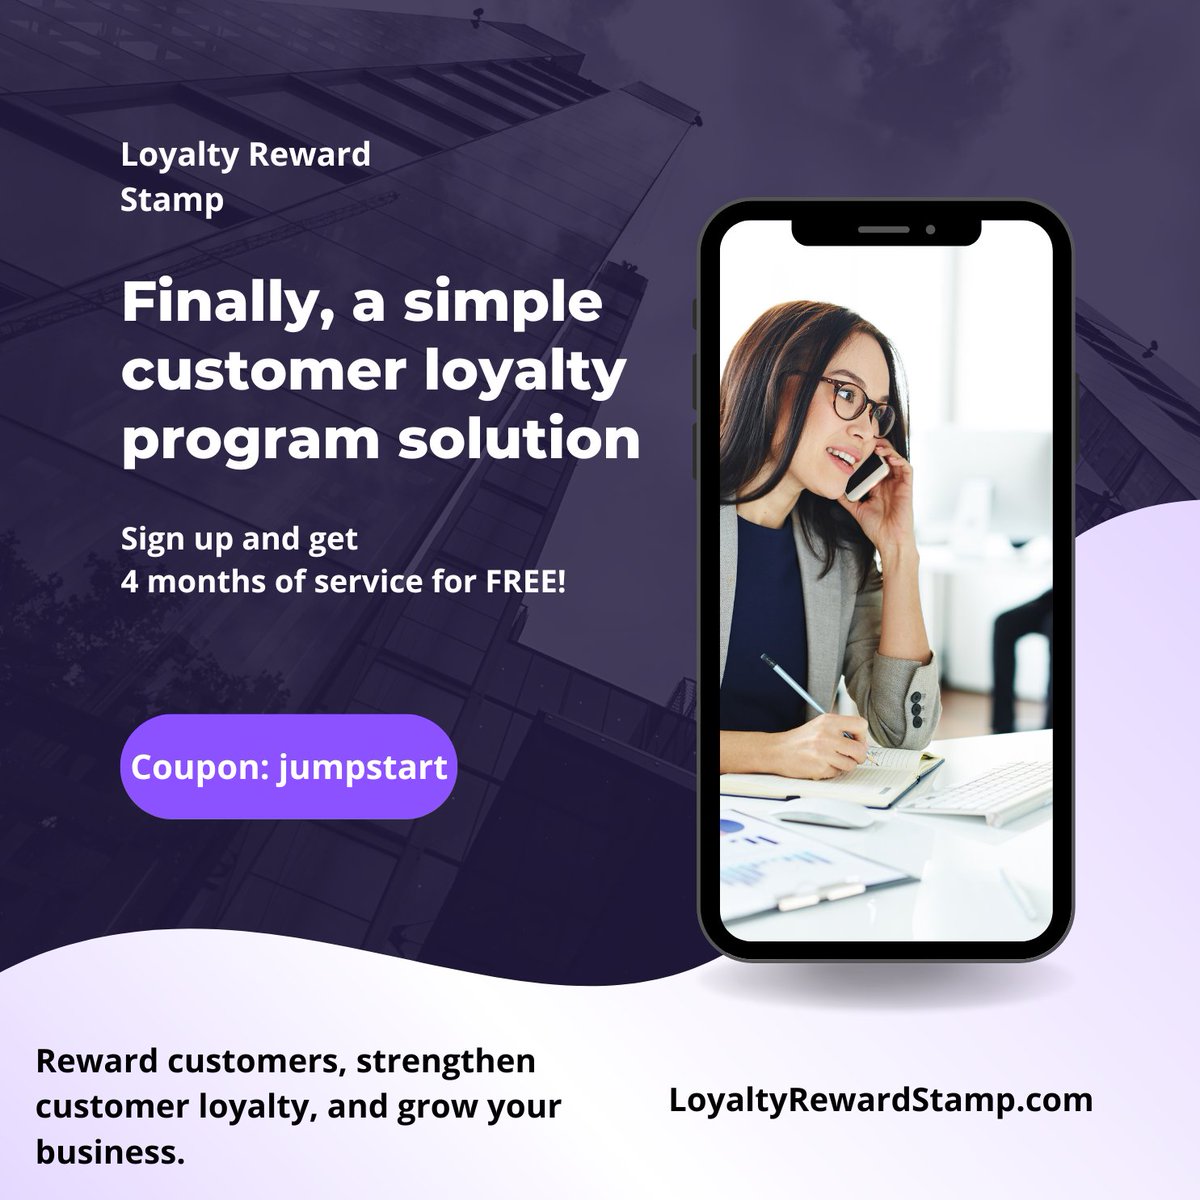 With LoyaltyRewardStamp.com you can take your restaurant's success to new heights. Our easy-to-use platform empowers you to create personalized stamp cards, offer enticing rewards, and engage with your customers like never before. 

#loyaltyprogram #rewardsprogram #loyaltyapp